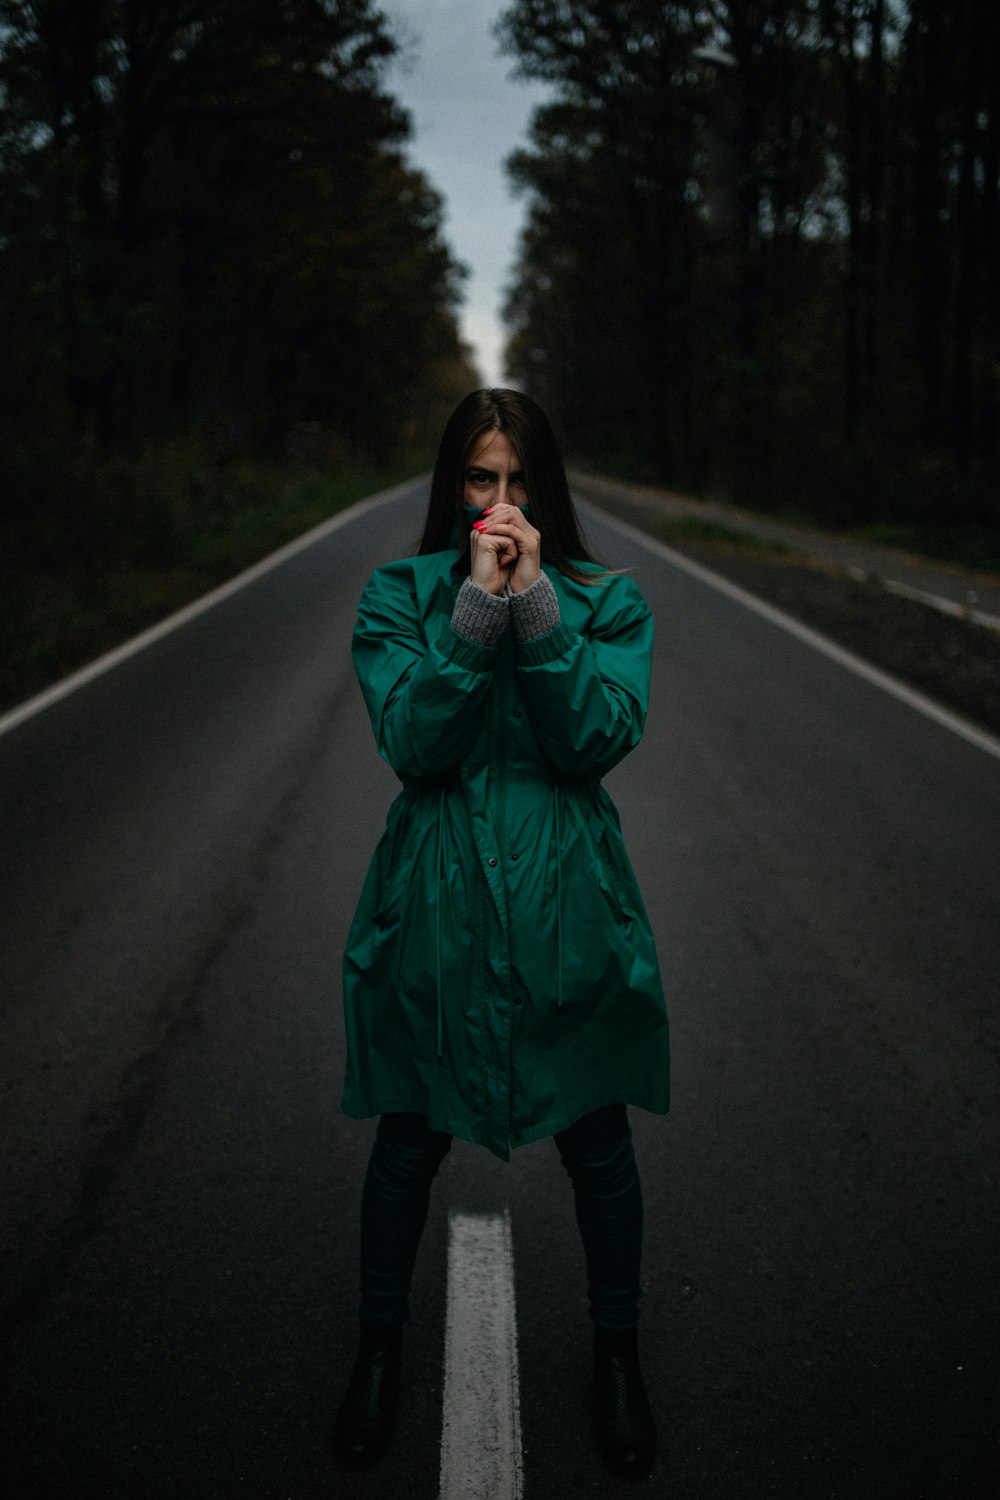 woman in green coat standing on road during daytime